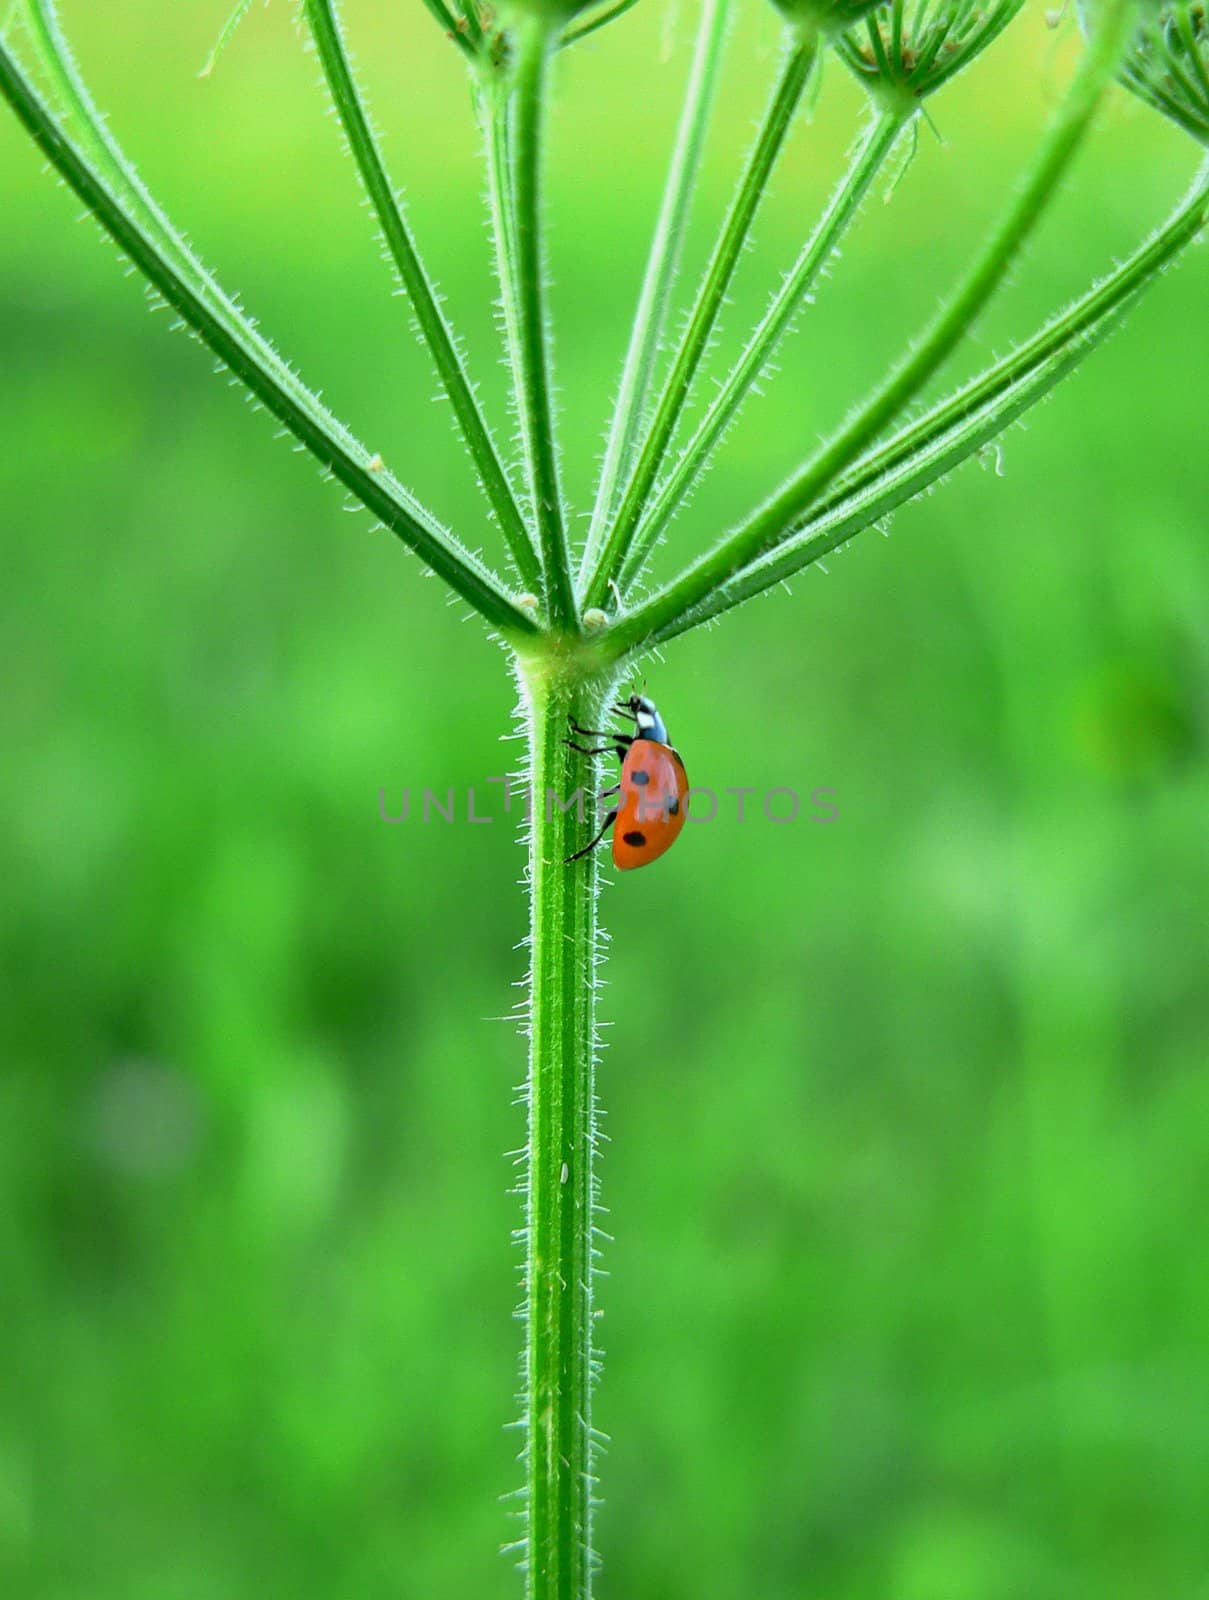 Deatil from a walking Ladybug on green background